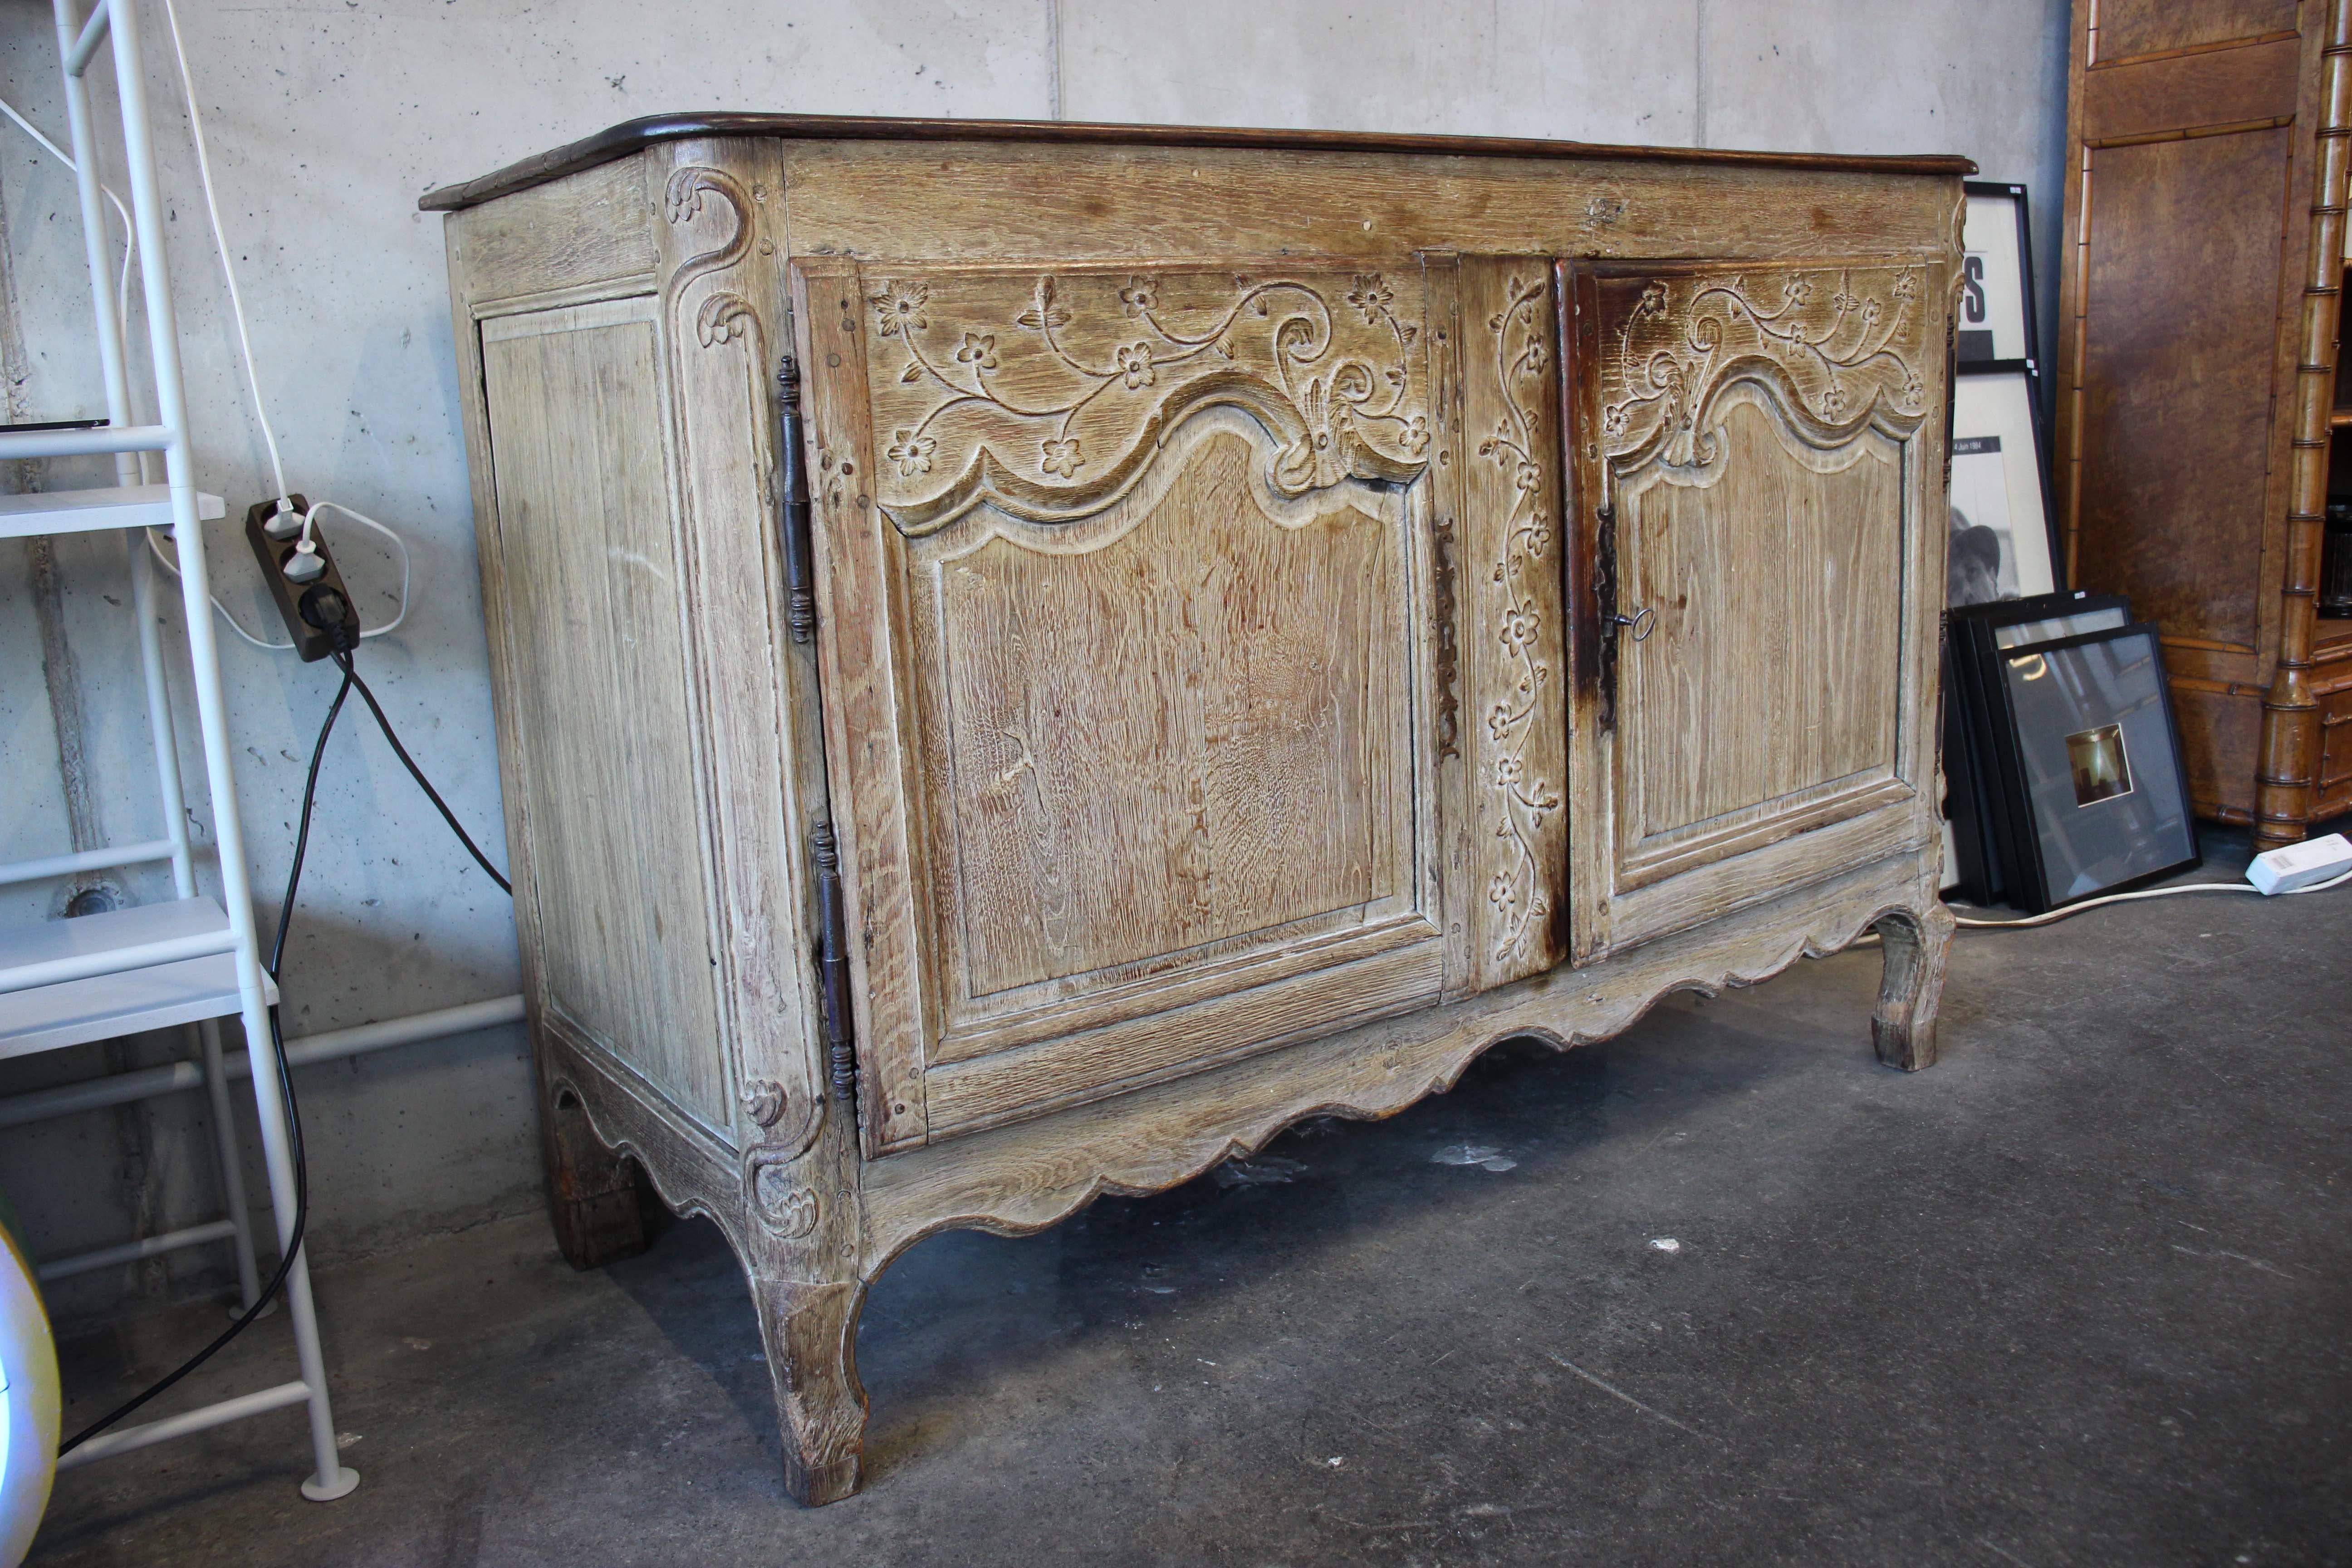 French 18th century baroque commode, European wooden buffet with floral ornament. This 18th century baroque dresser origins from France and is a wonderful antique piece of furniture. The painting is in original condition.